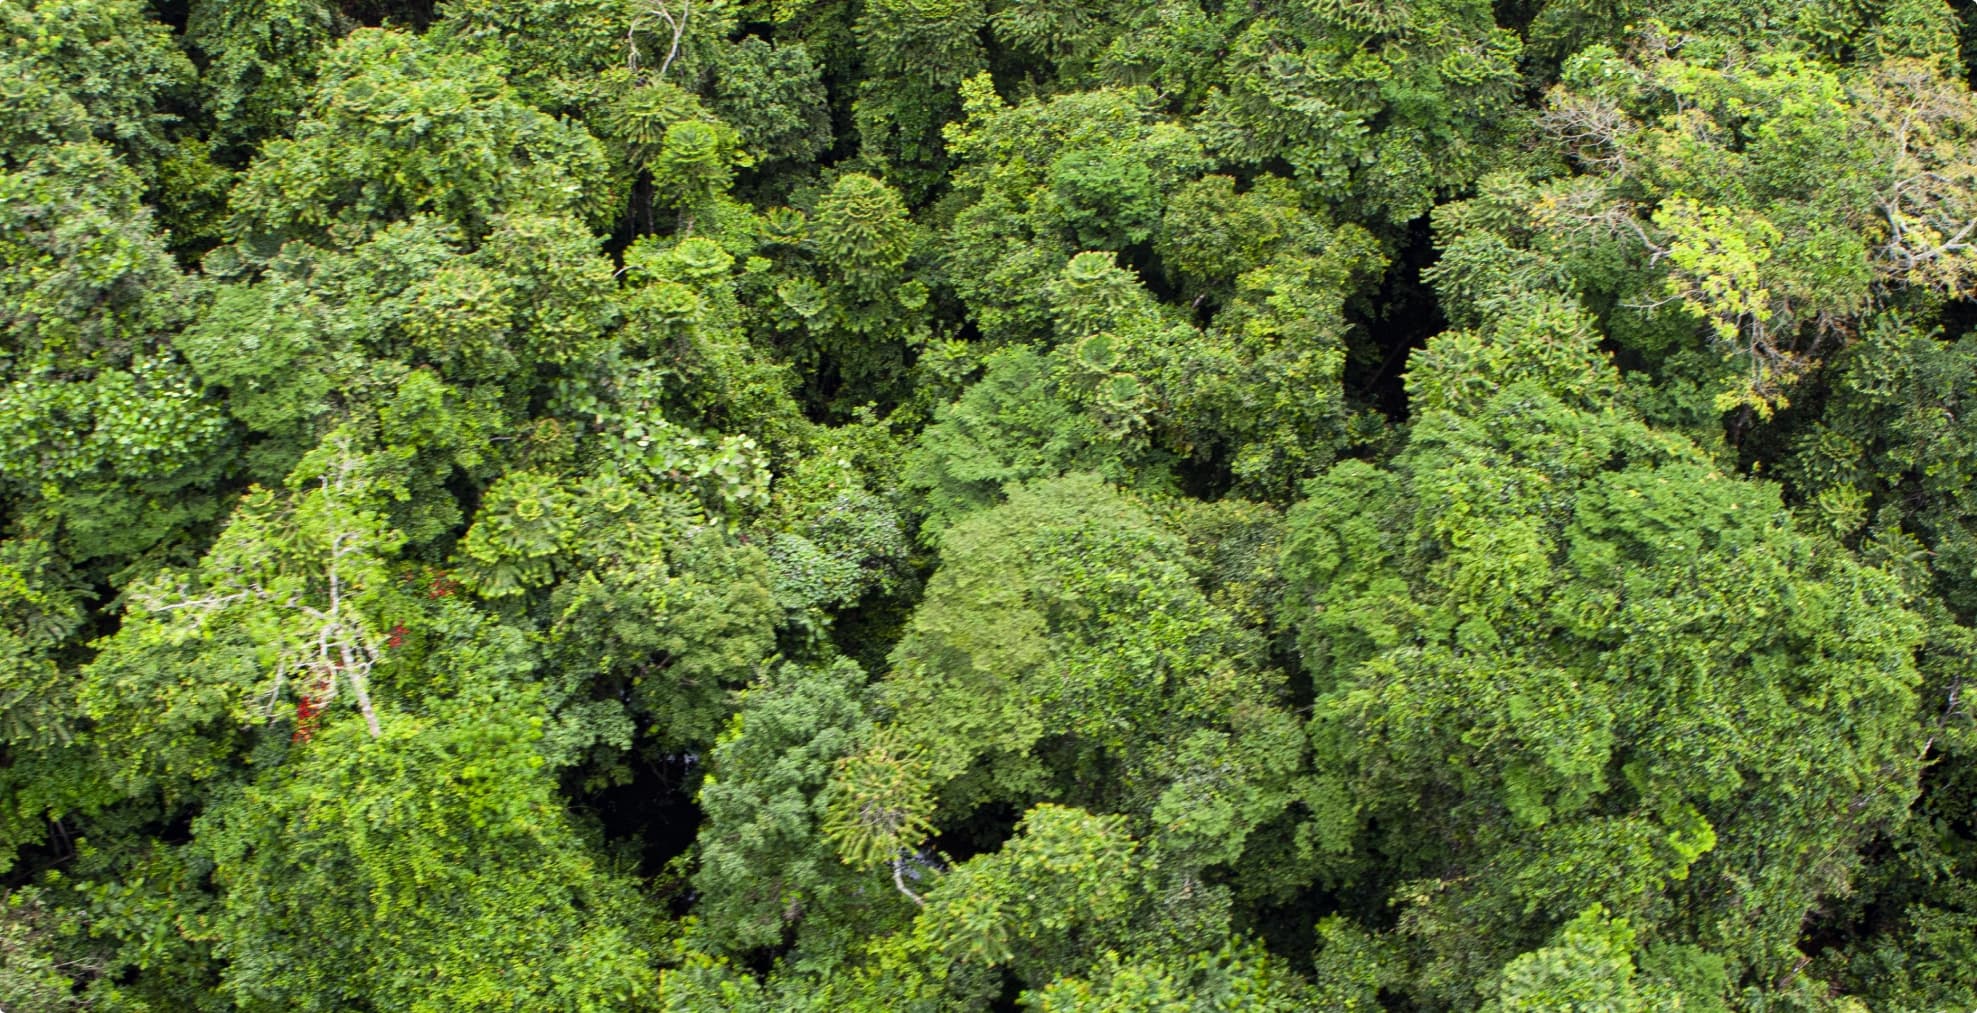 'Virtuous cycle': Putting a price on CO2 in Gabon's forests